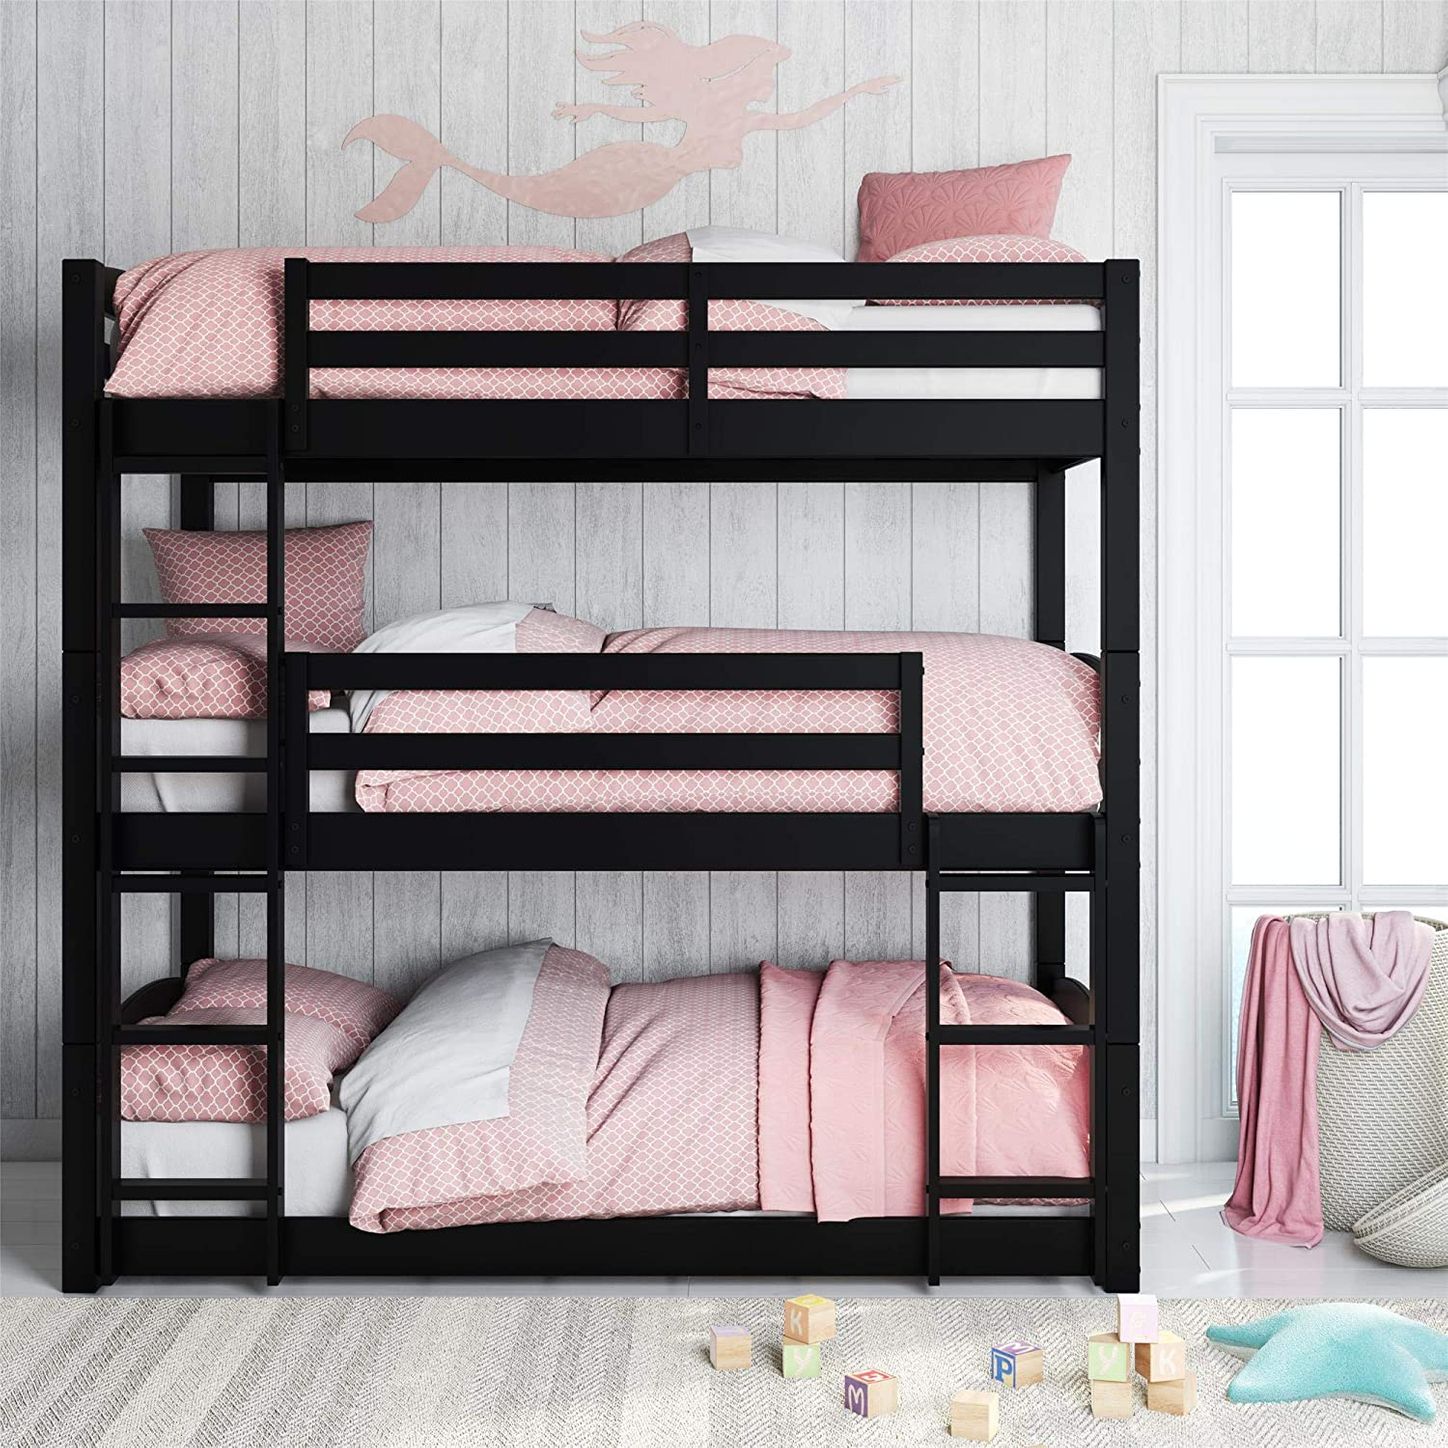 8 Best Bunk Beds 2020 The Strategist, Good Age For Bunk Beds